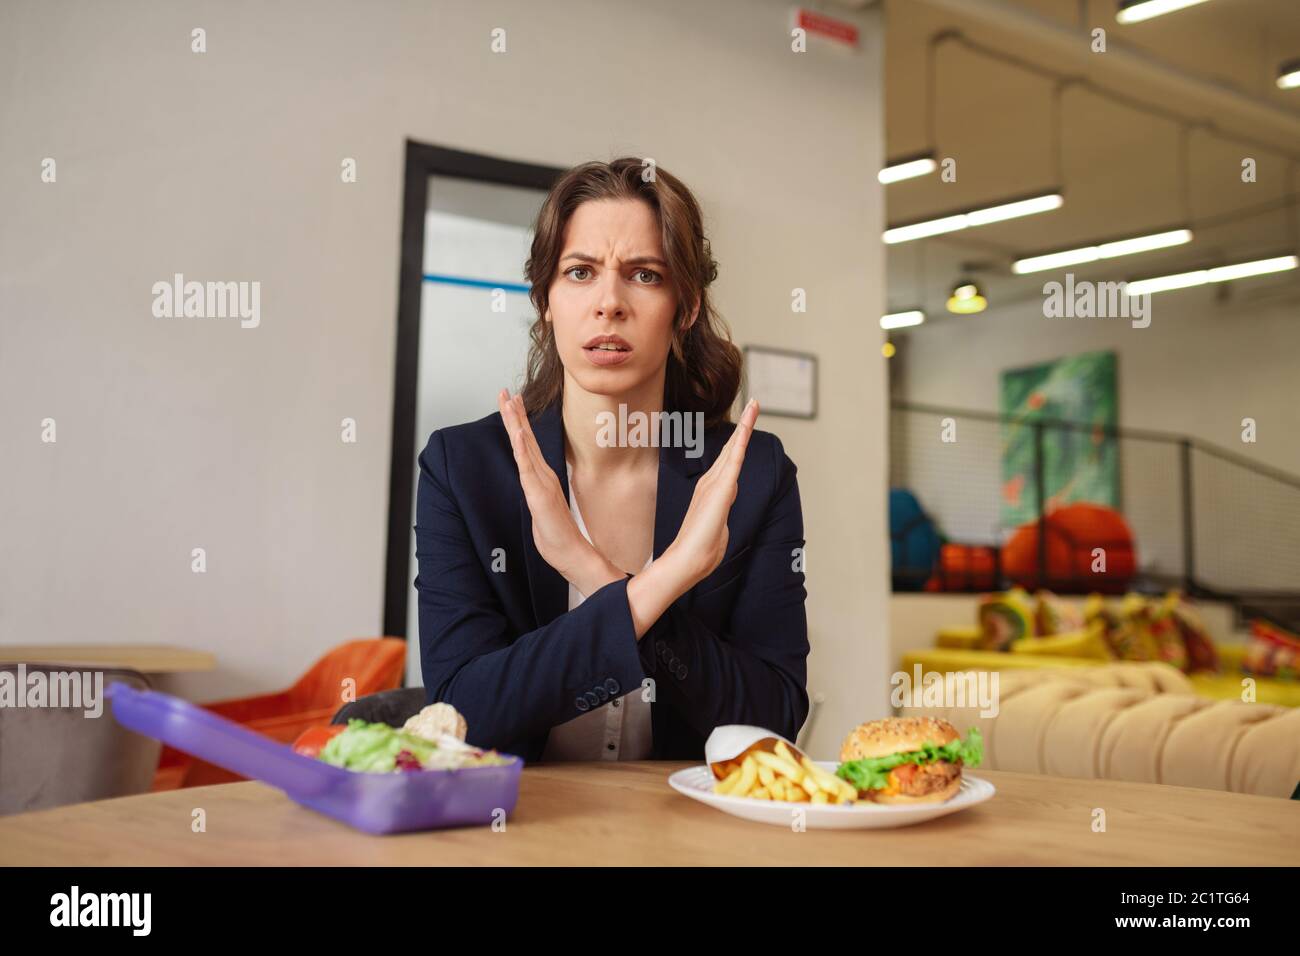 Frowning young woman sitting at table before eating Stock Photo